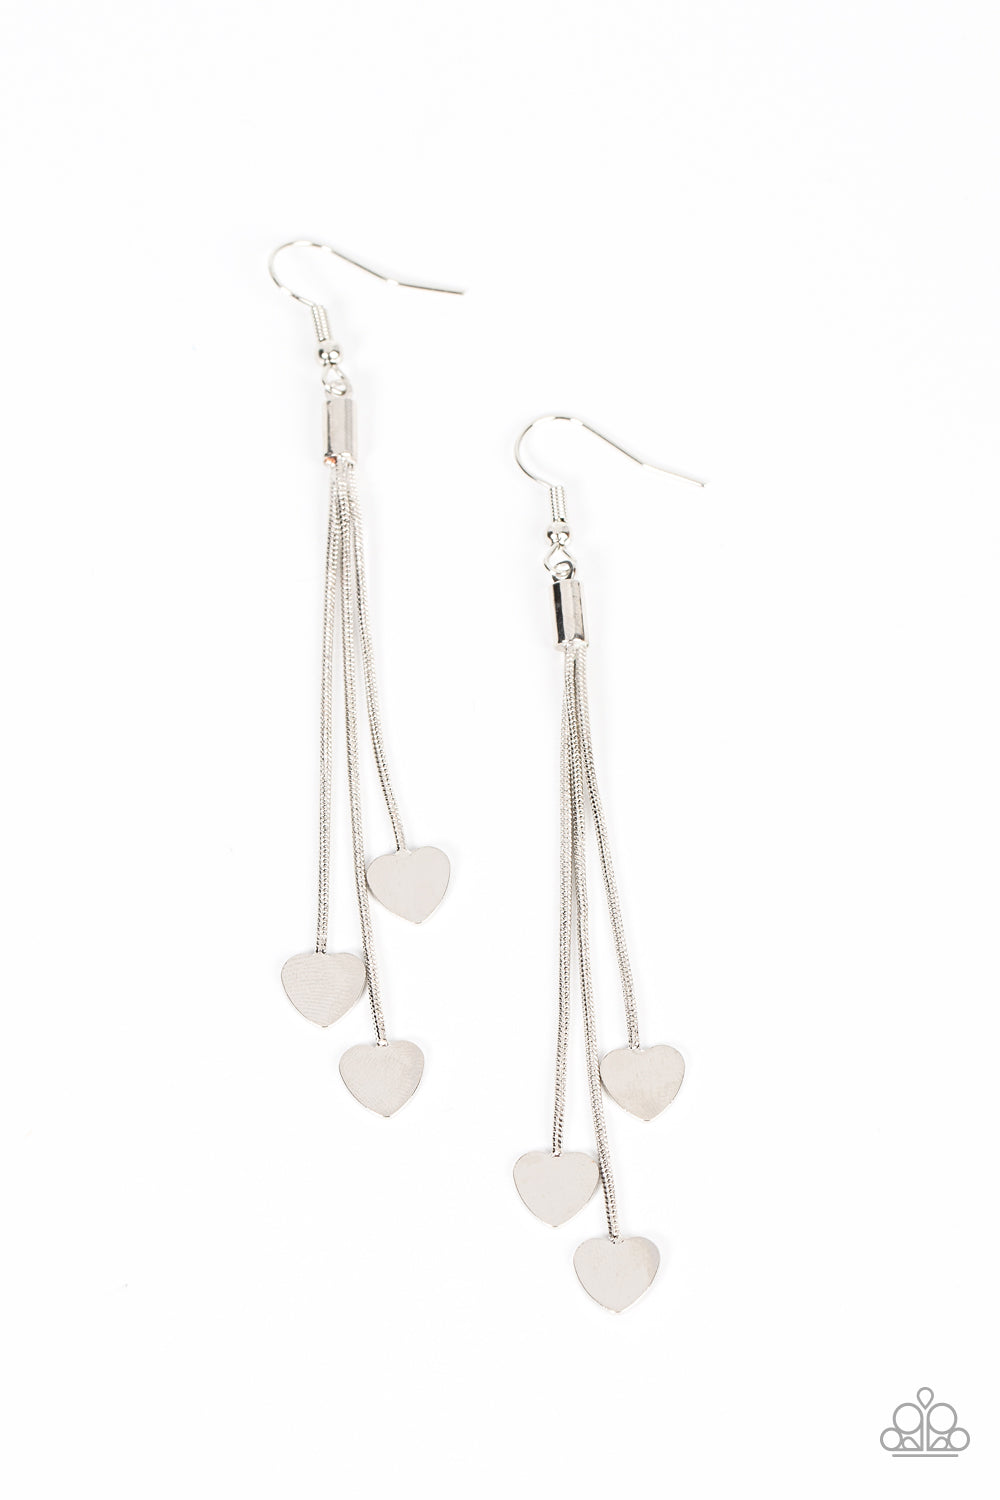 Higher Love - Silver Heart Charm Earrings shiny silver heart charms delicately trickle from varying lengths of rounded silver snake chain, resulting in a flirtatious tassel. Earring attaches to a standard fishhook fitting.  Sold as one pair of earrings.